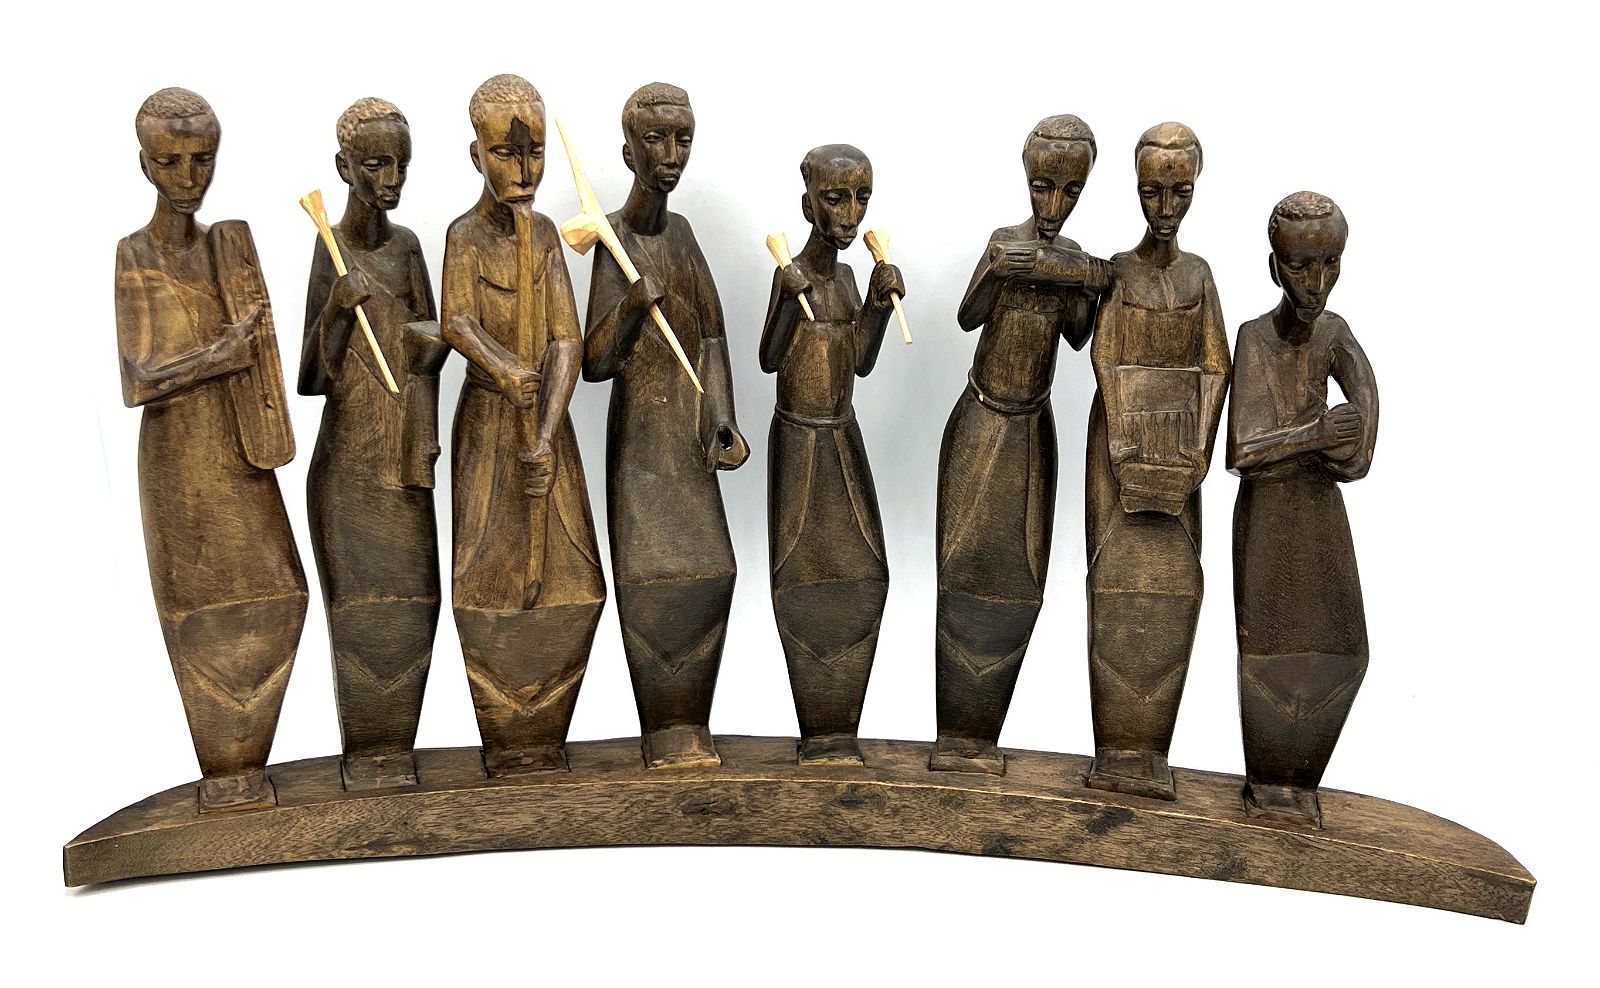 8 CARVED WOODEN AFRICAN FIGURES 8 3d22ab